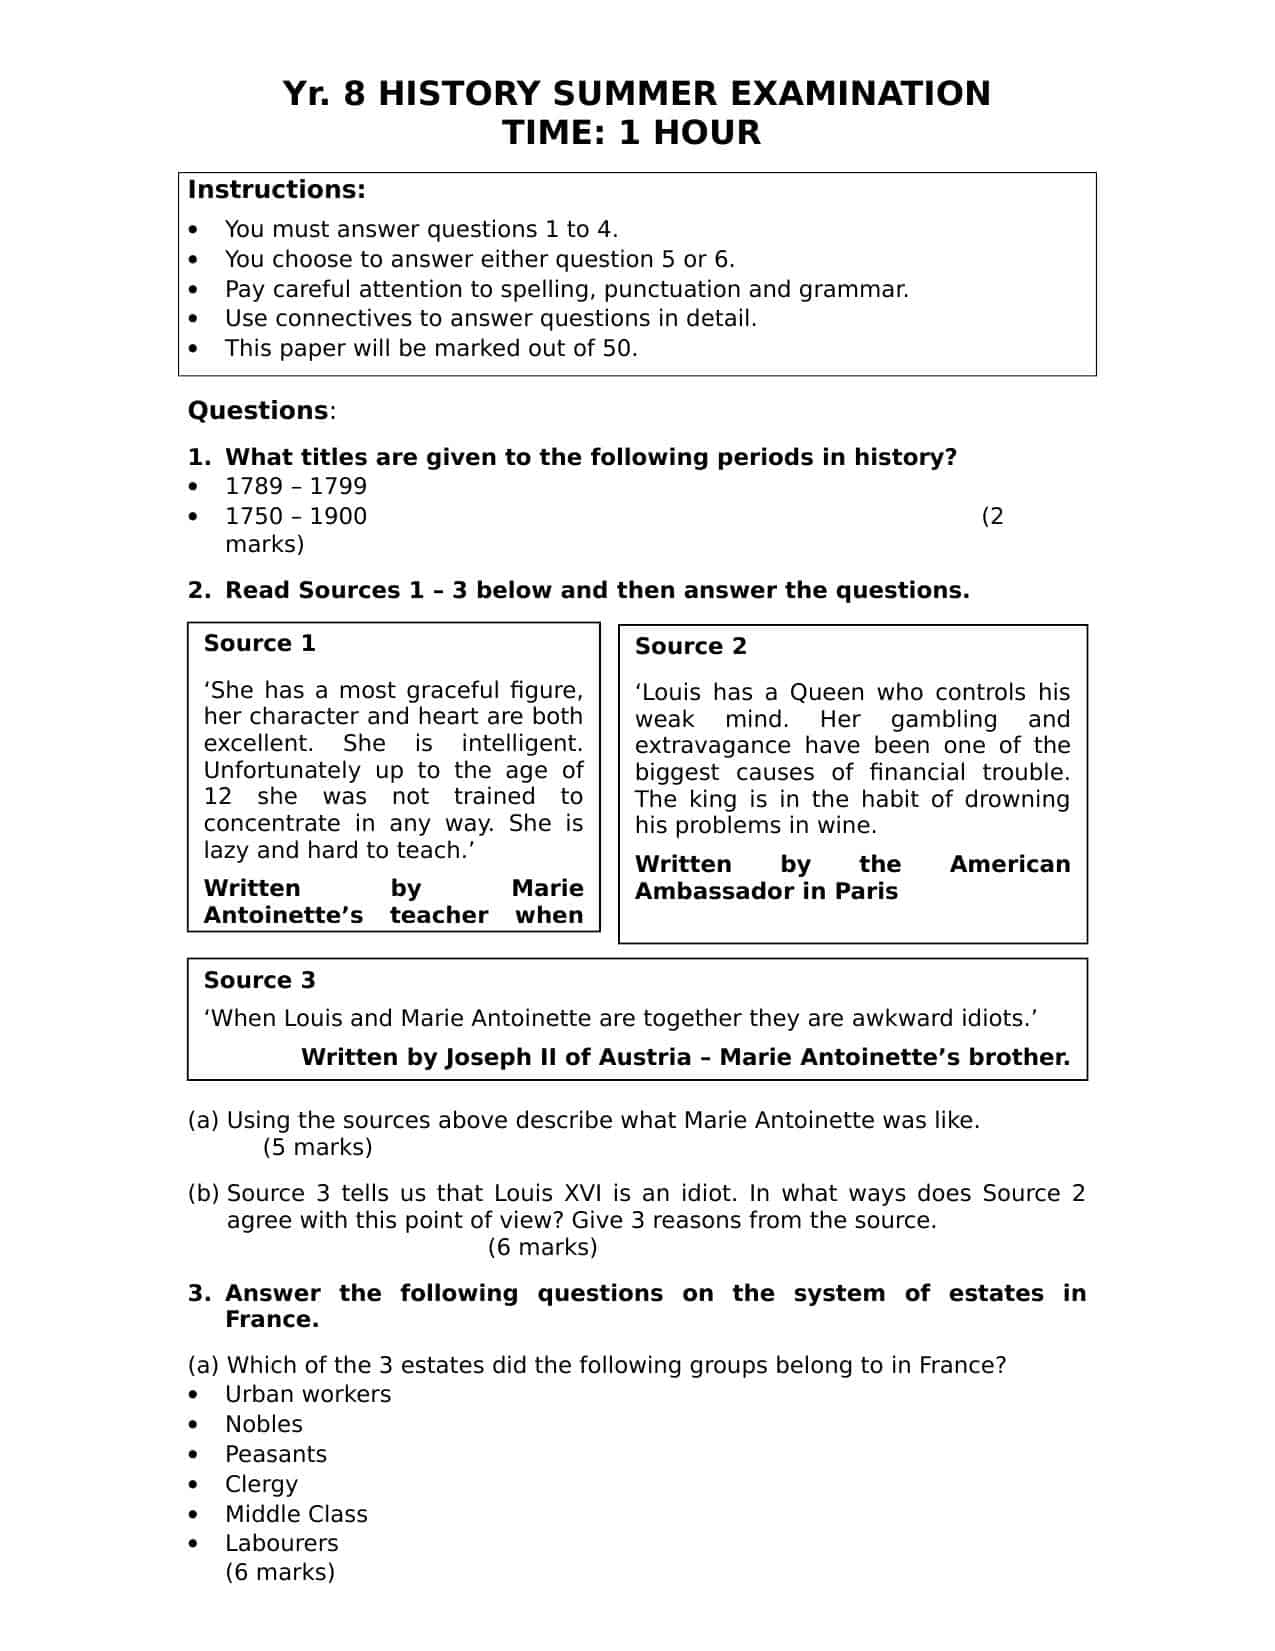 free-printable-worksheets-for-year-7-english-learning-year-7-history-practice-examination-ks3